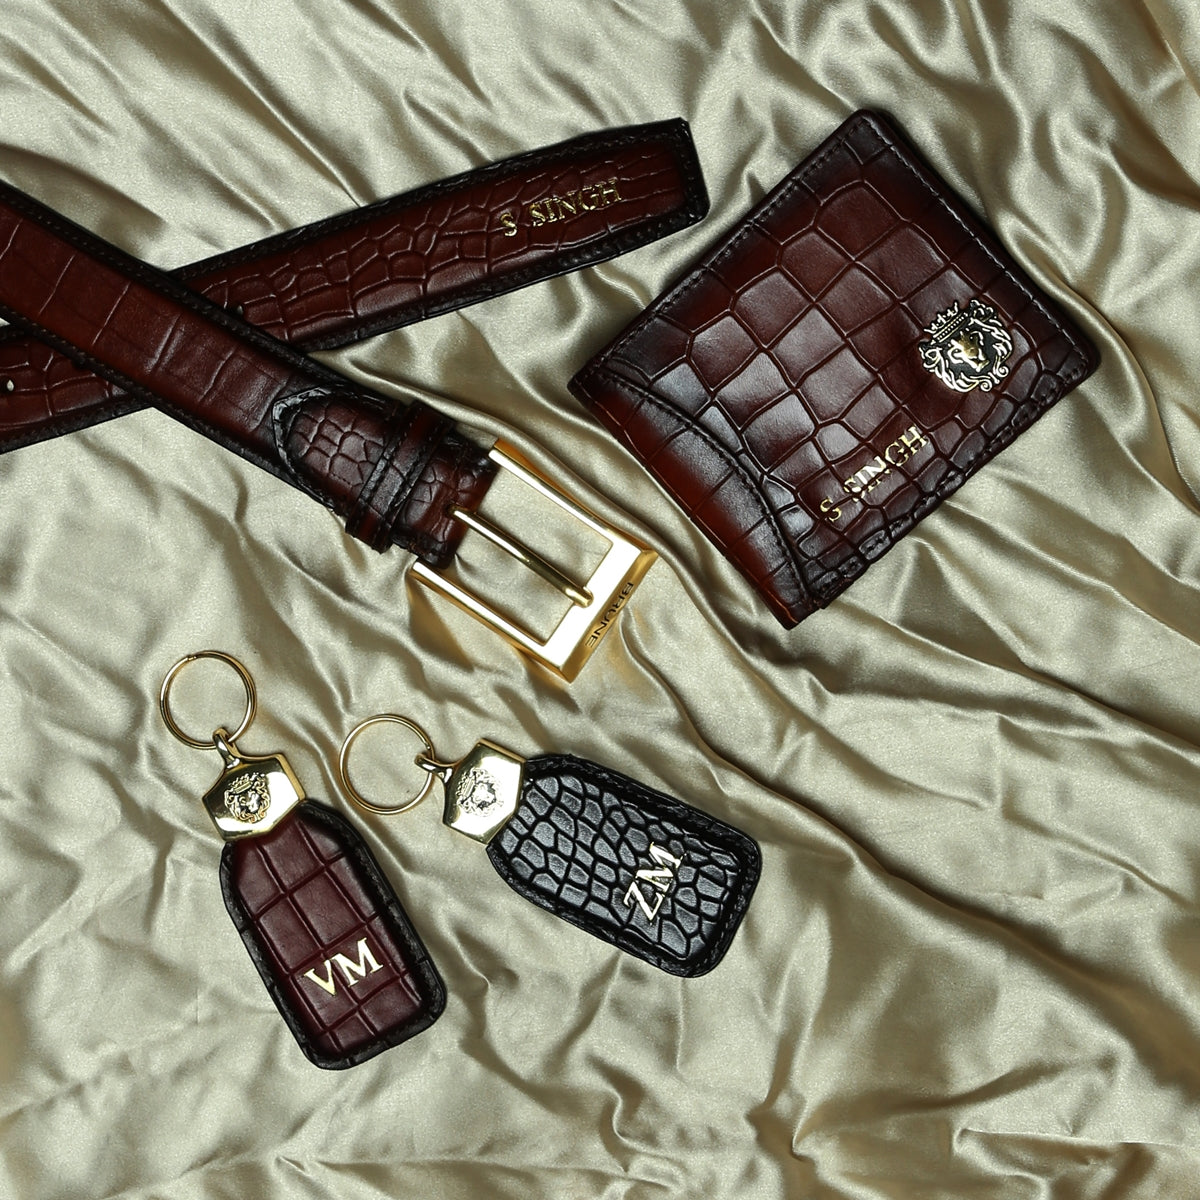 Bespoke Dark Brown Leather Wallet, Belt and Two Keychain Customized with Embossed Initial by Brune & Bareskin